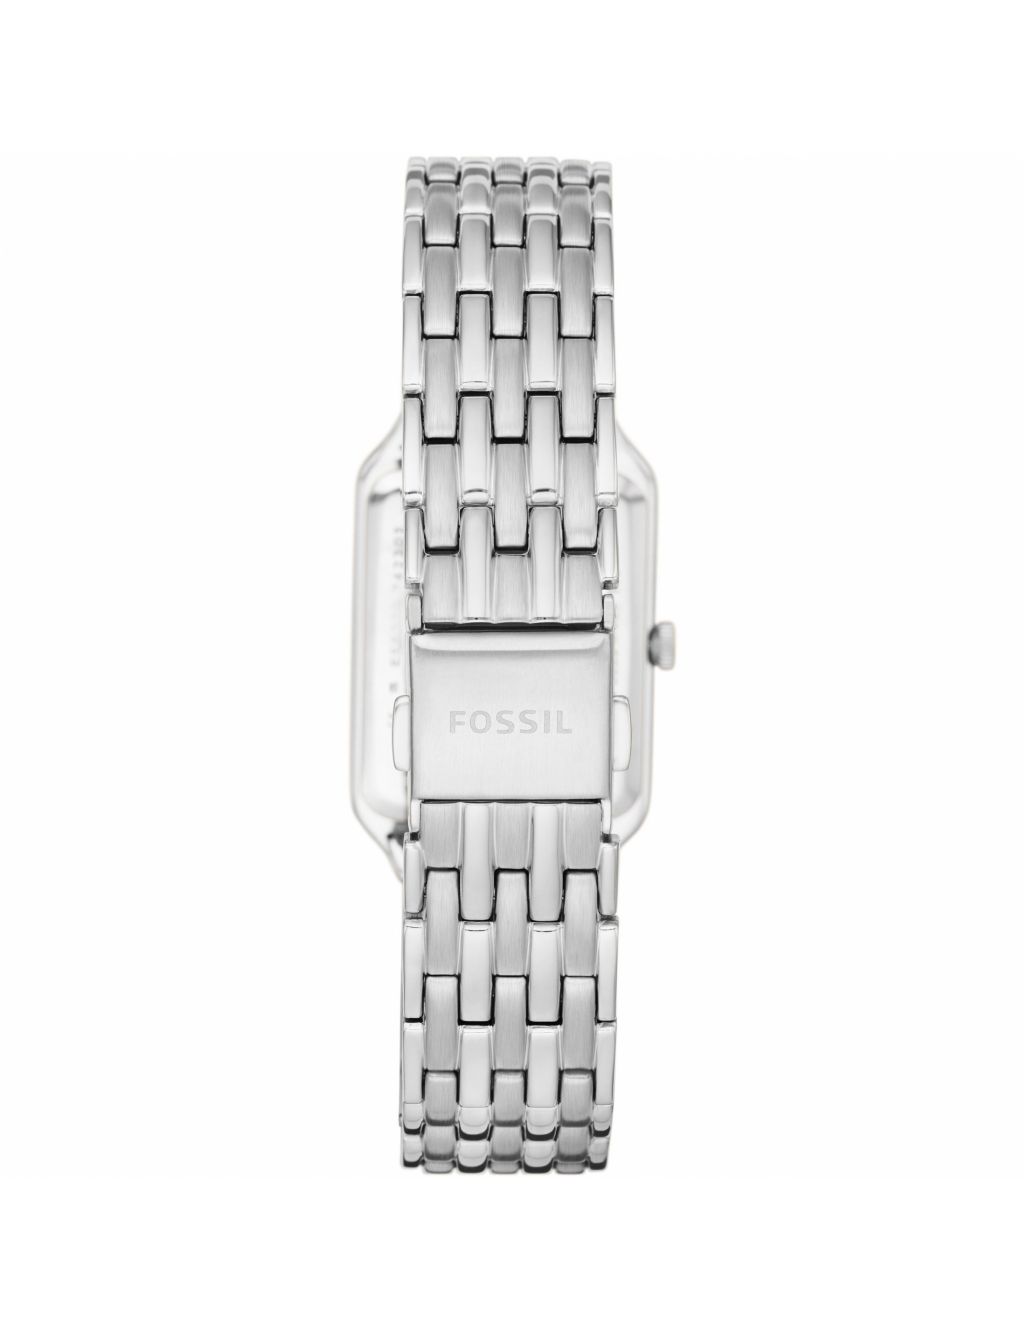 Fossil Raquel Stainless Steel Watch image 2